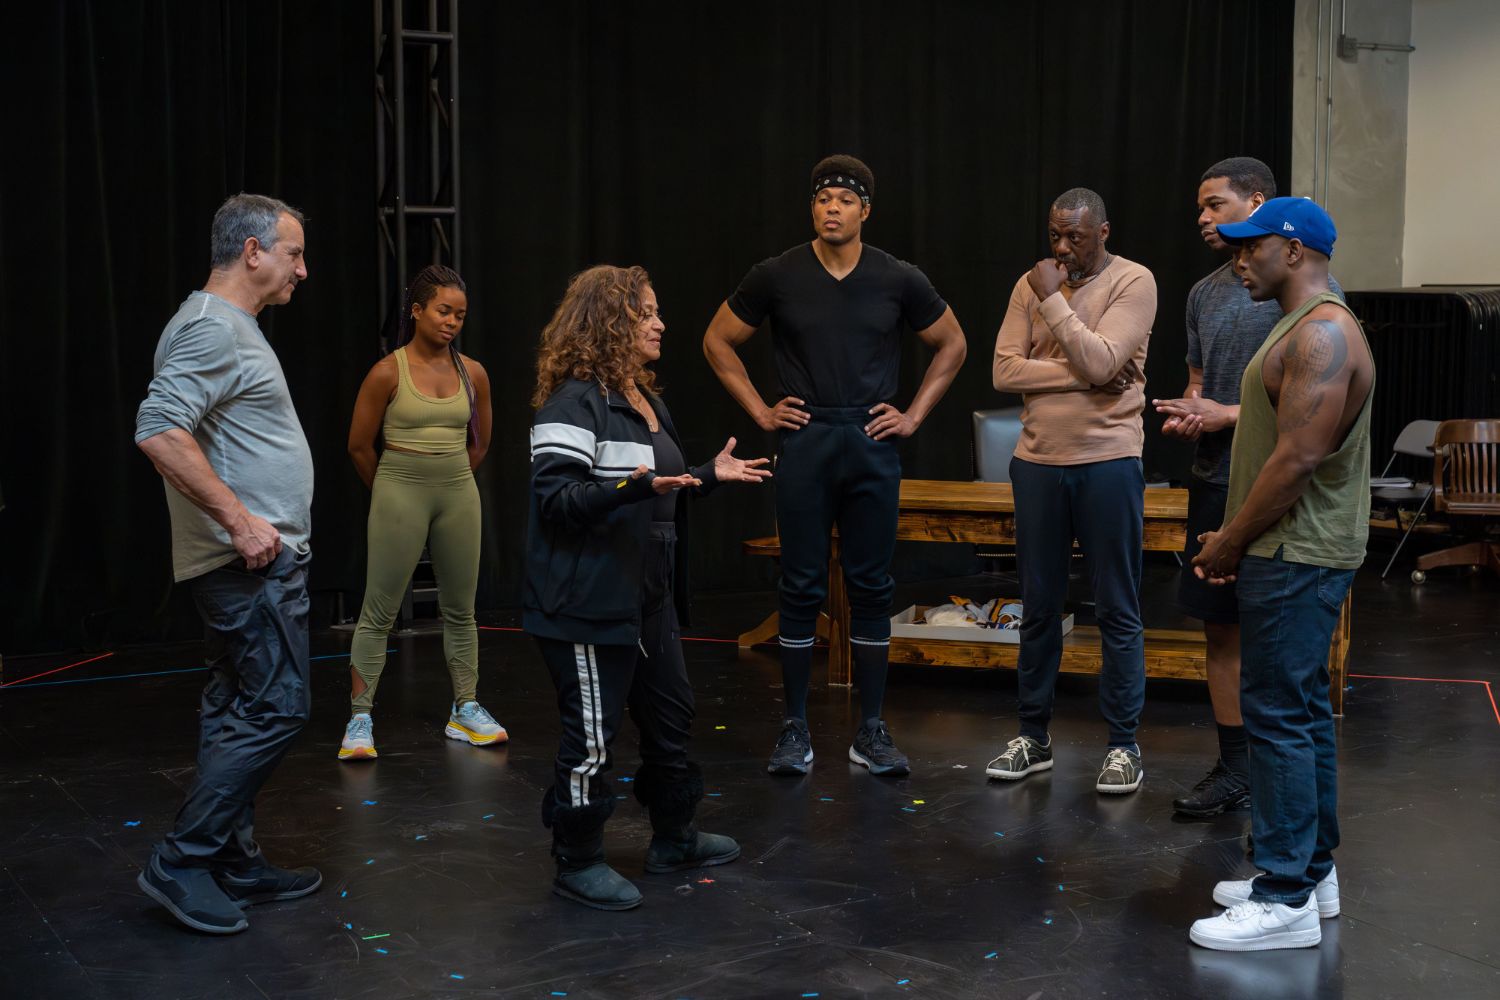 PHOTO: Javier Vasquez | The South Pasadenan | The company of "Fetch Clay, Make Man" in rehearsal. "Fetch Clay, Make Man" plays at the Kirk Douglas Theatre in Culver City June 25 to July 16, 2023.